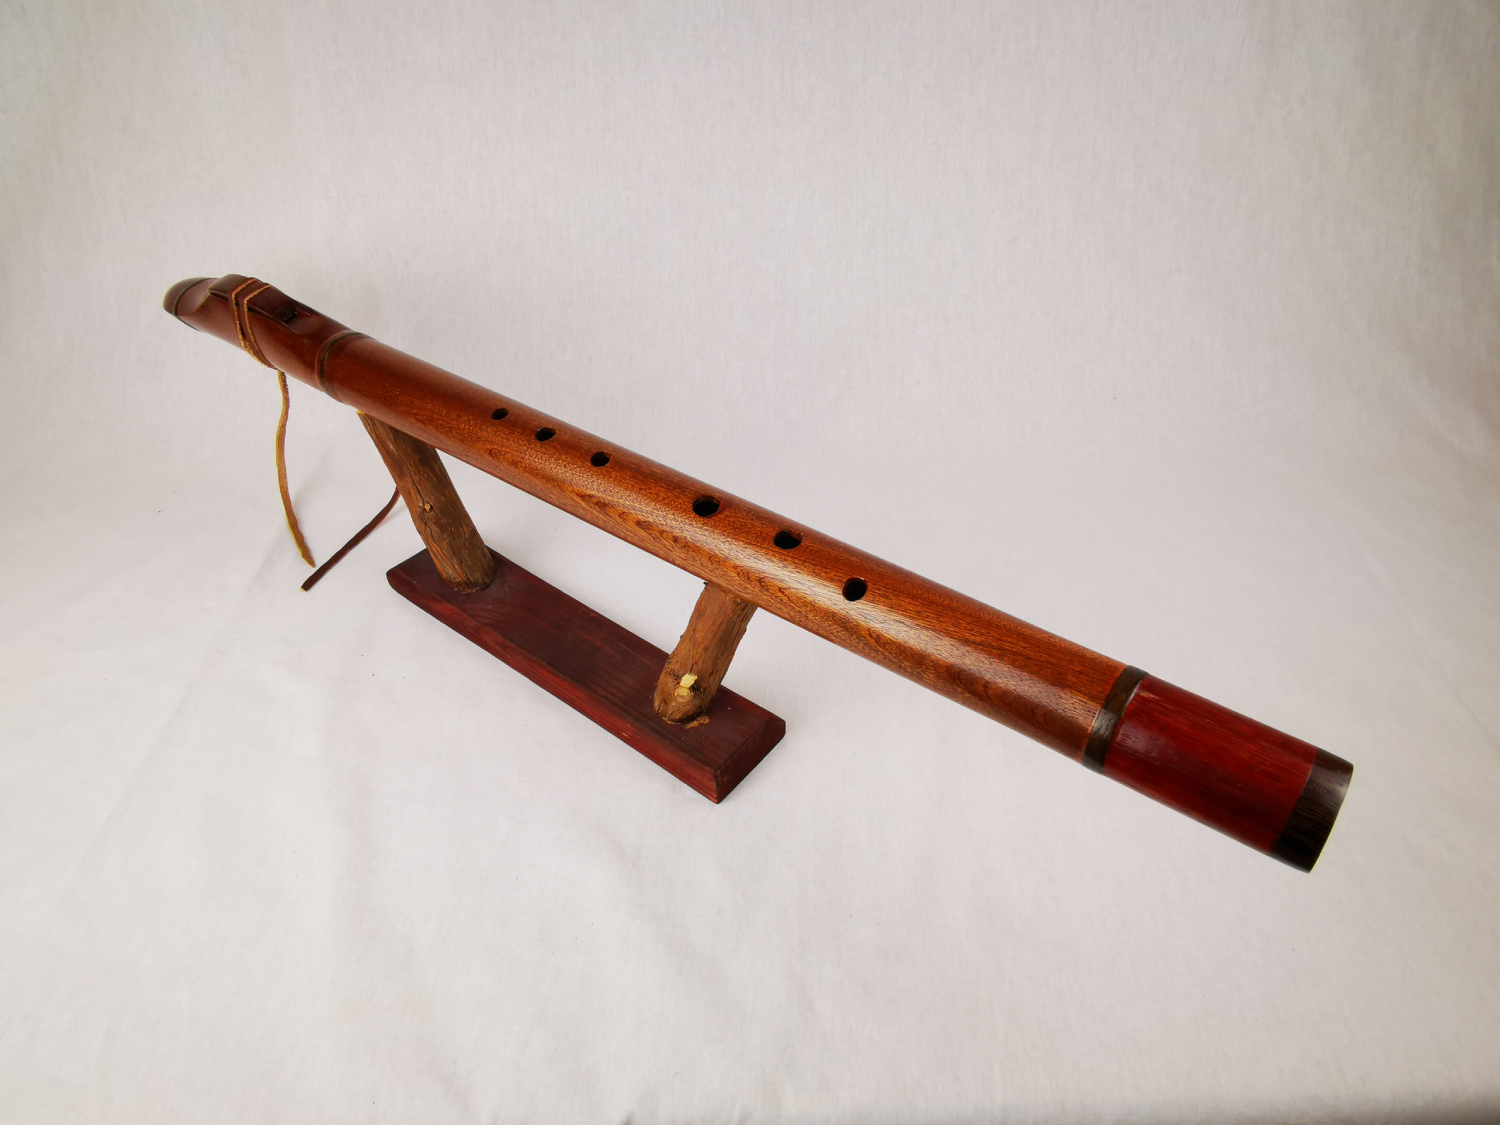 native american wooden flute